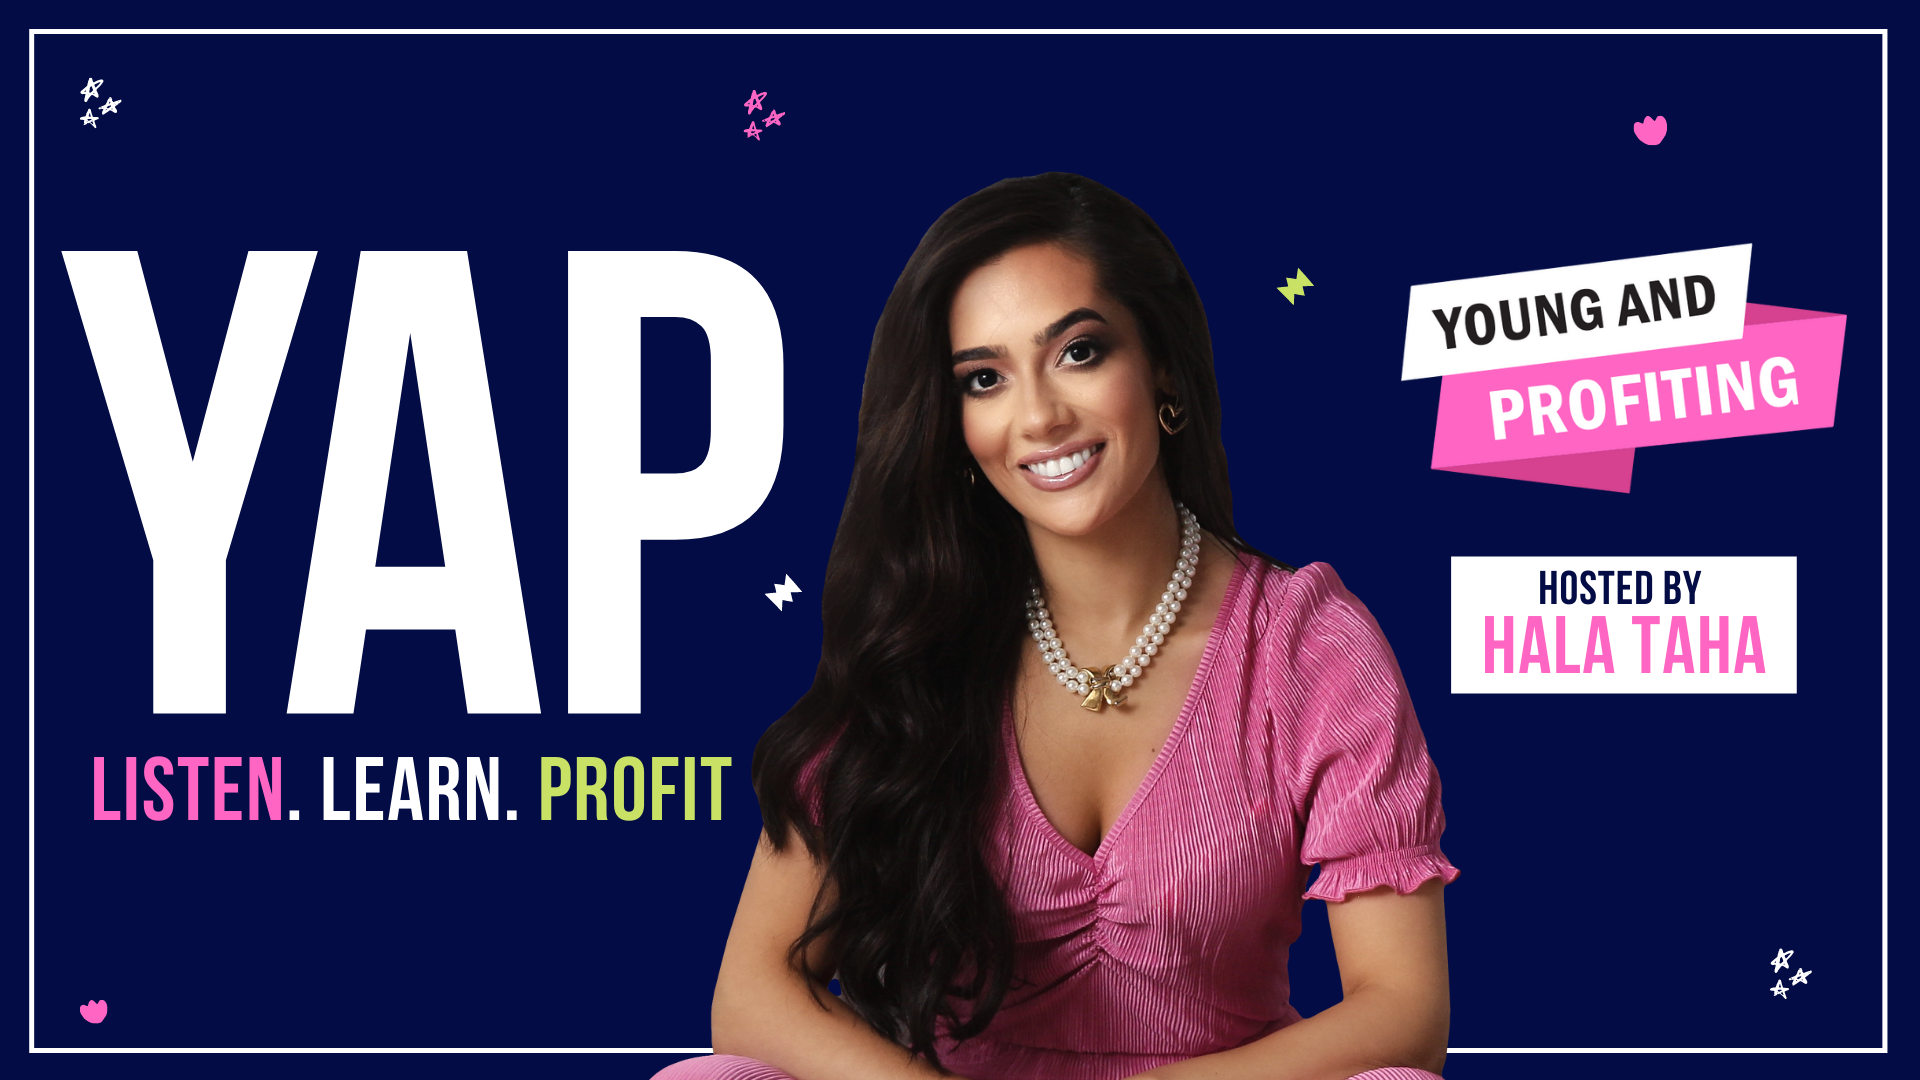 Image of Hala Taha, host of Young and Profiting, on blue backdrop. The text reads the title of the show and its tagline: "Listen. Learn. Profit."